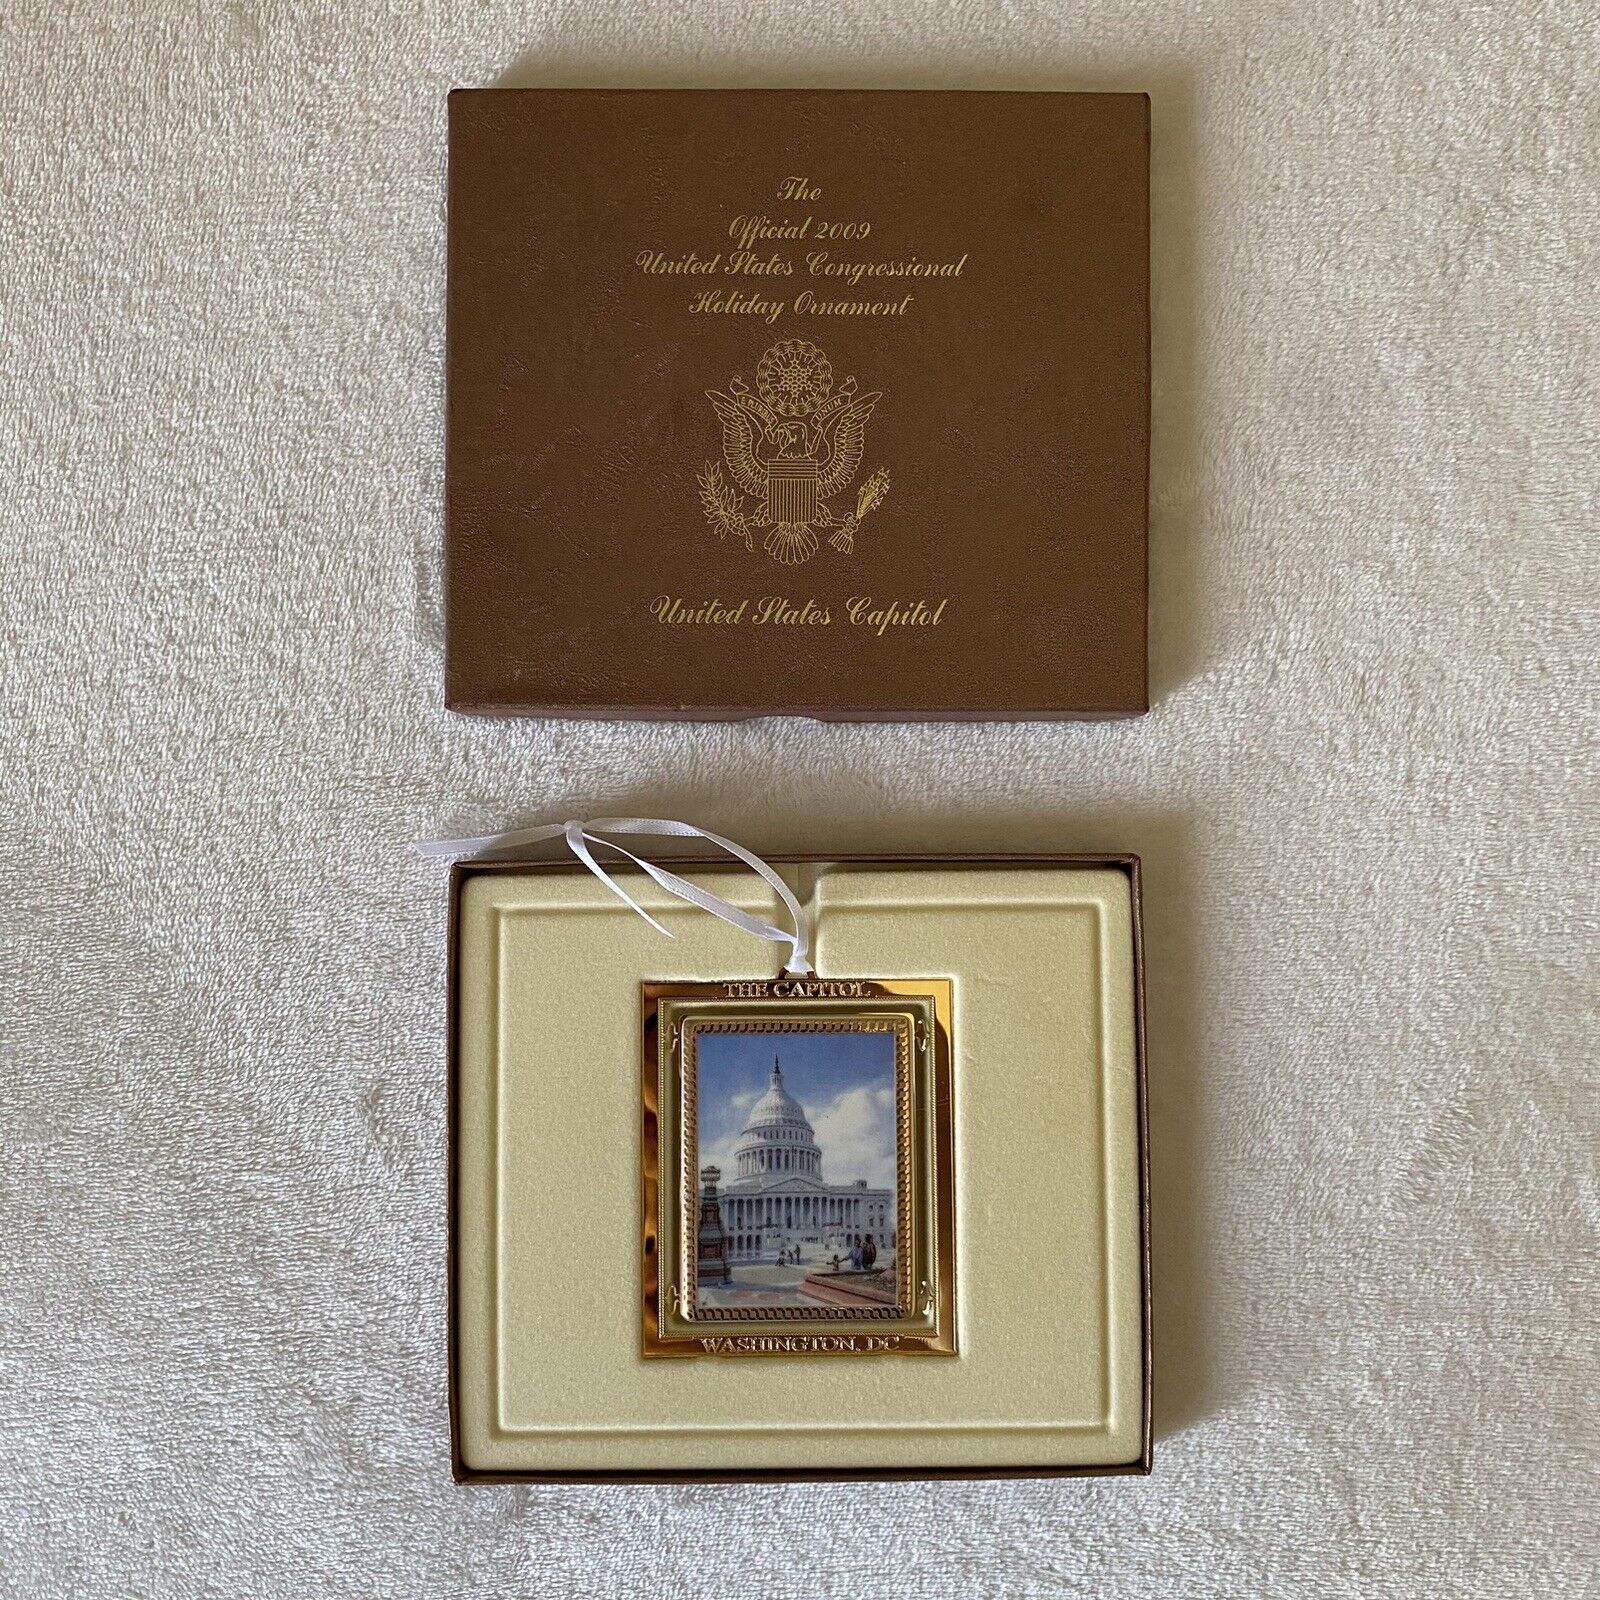 Official 2009 United States Congressional Holiday Ornament